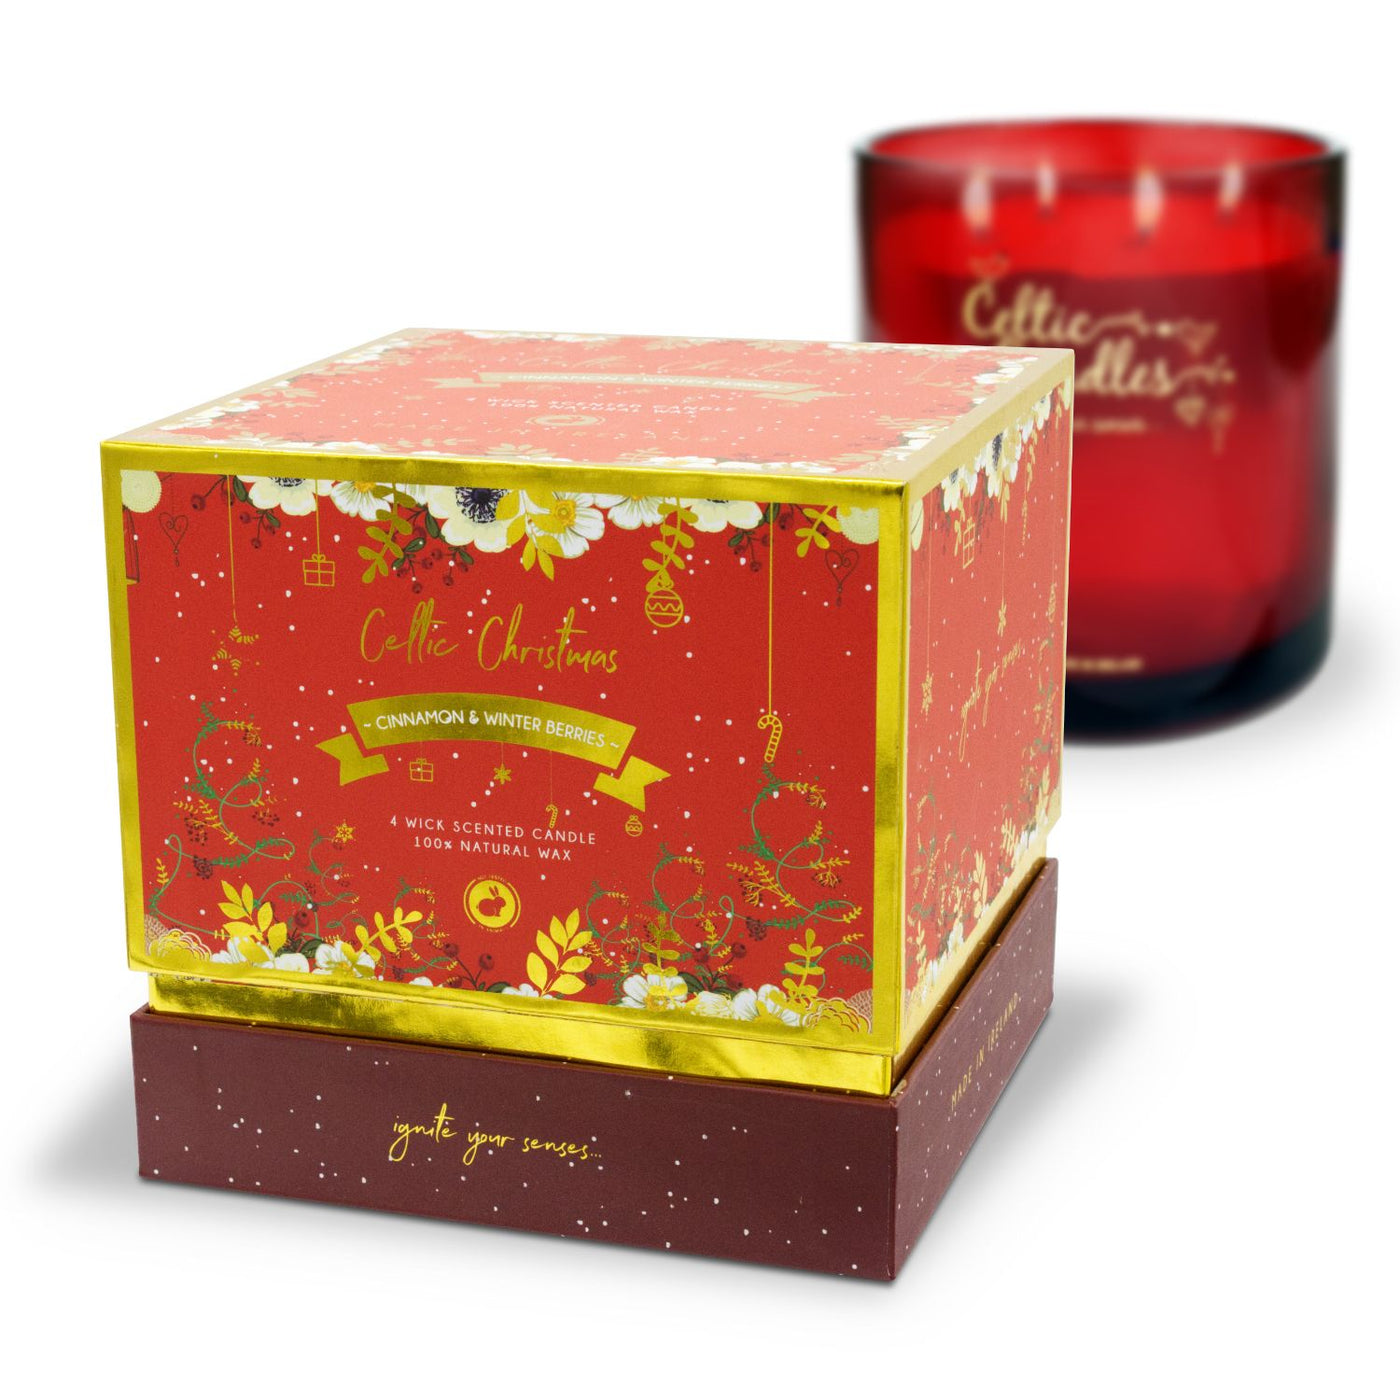 Celtic Candles Christmas 2023 Luxury 4 Wick Candle - Cinnamon & Winter Berries/Frankincense and Myrrh